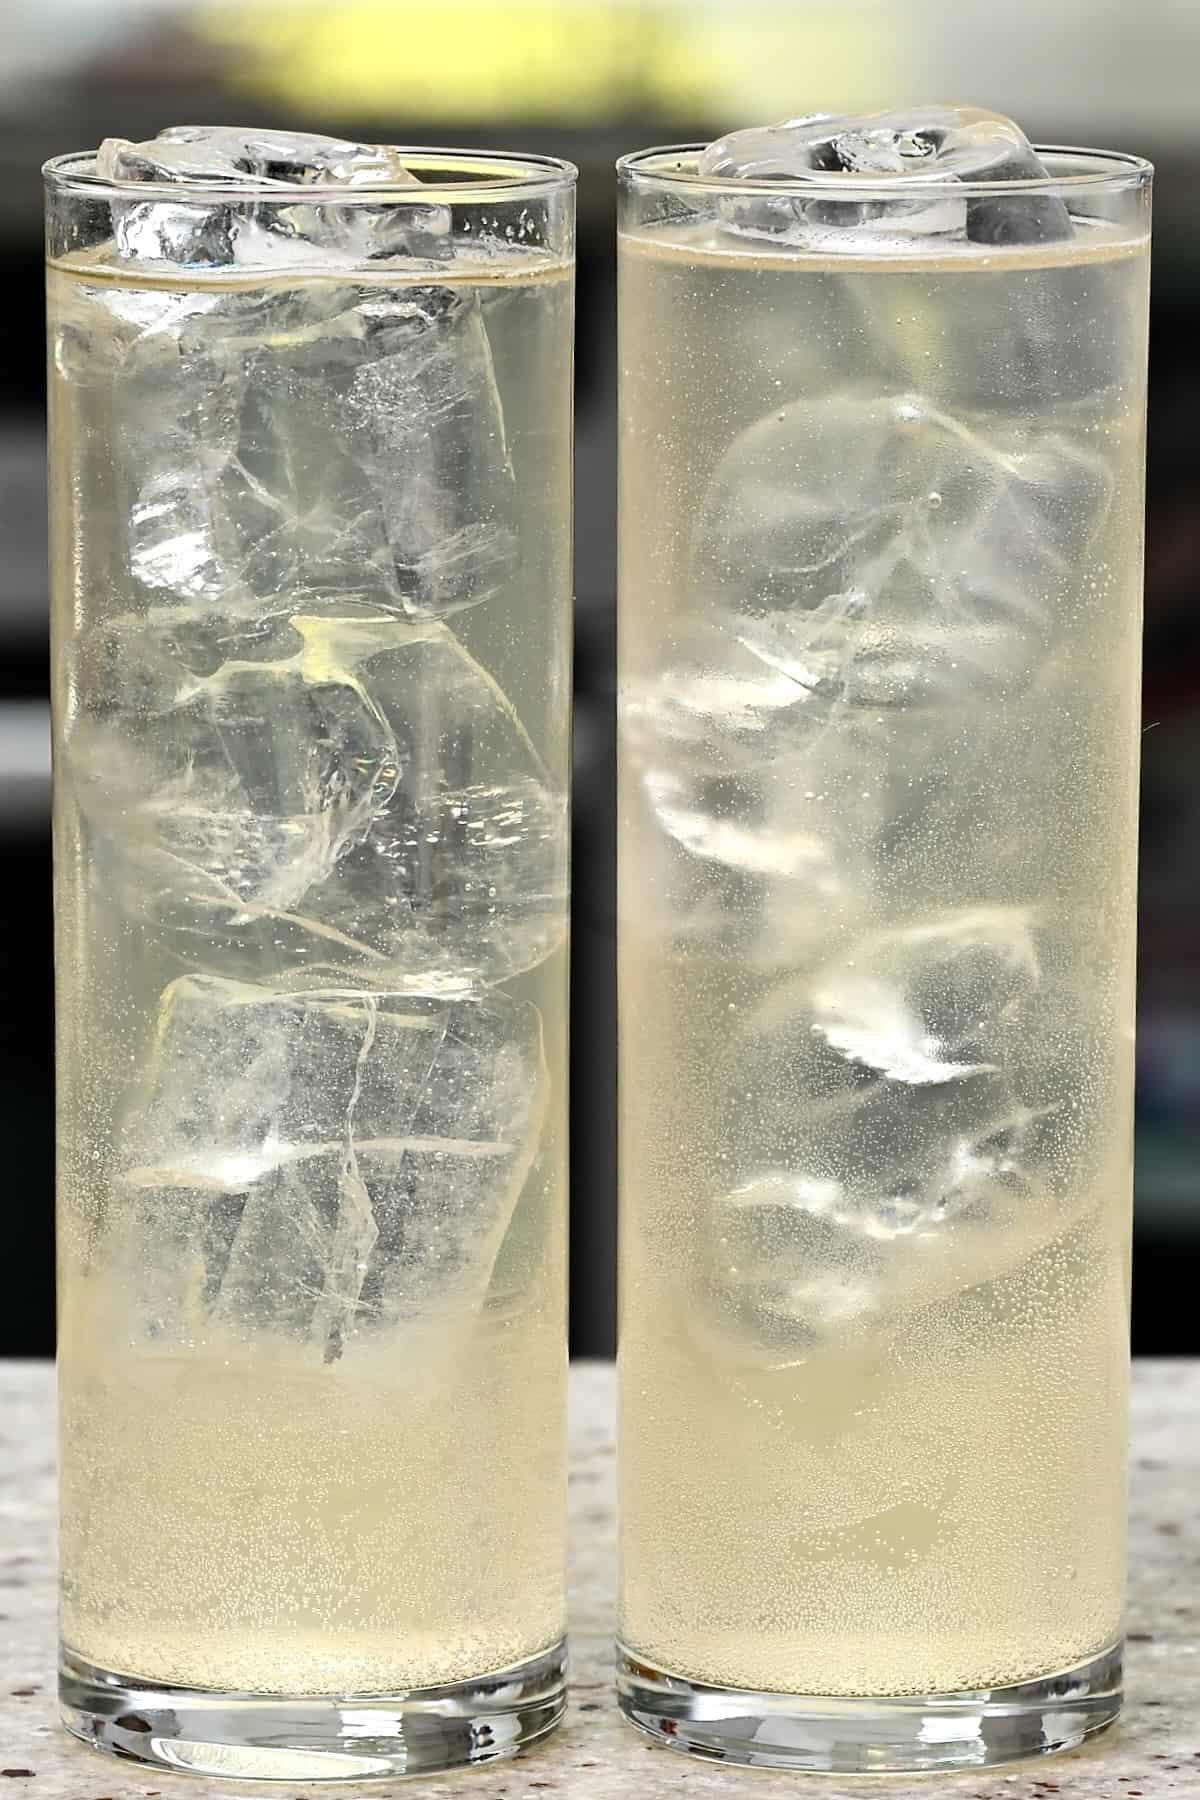 Homemade ginger ale served in two glasses with ice